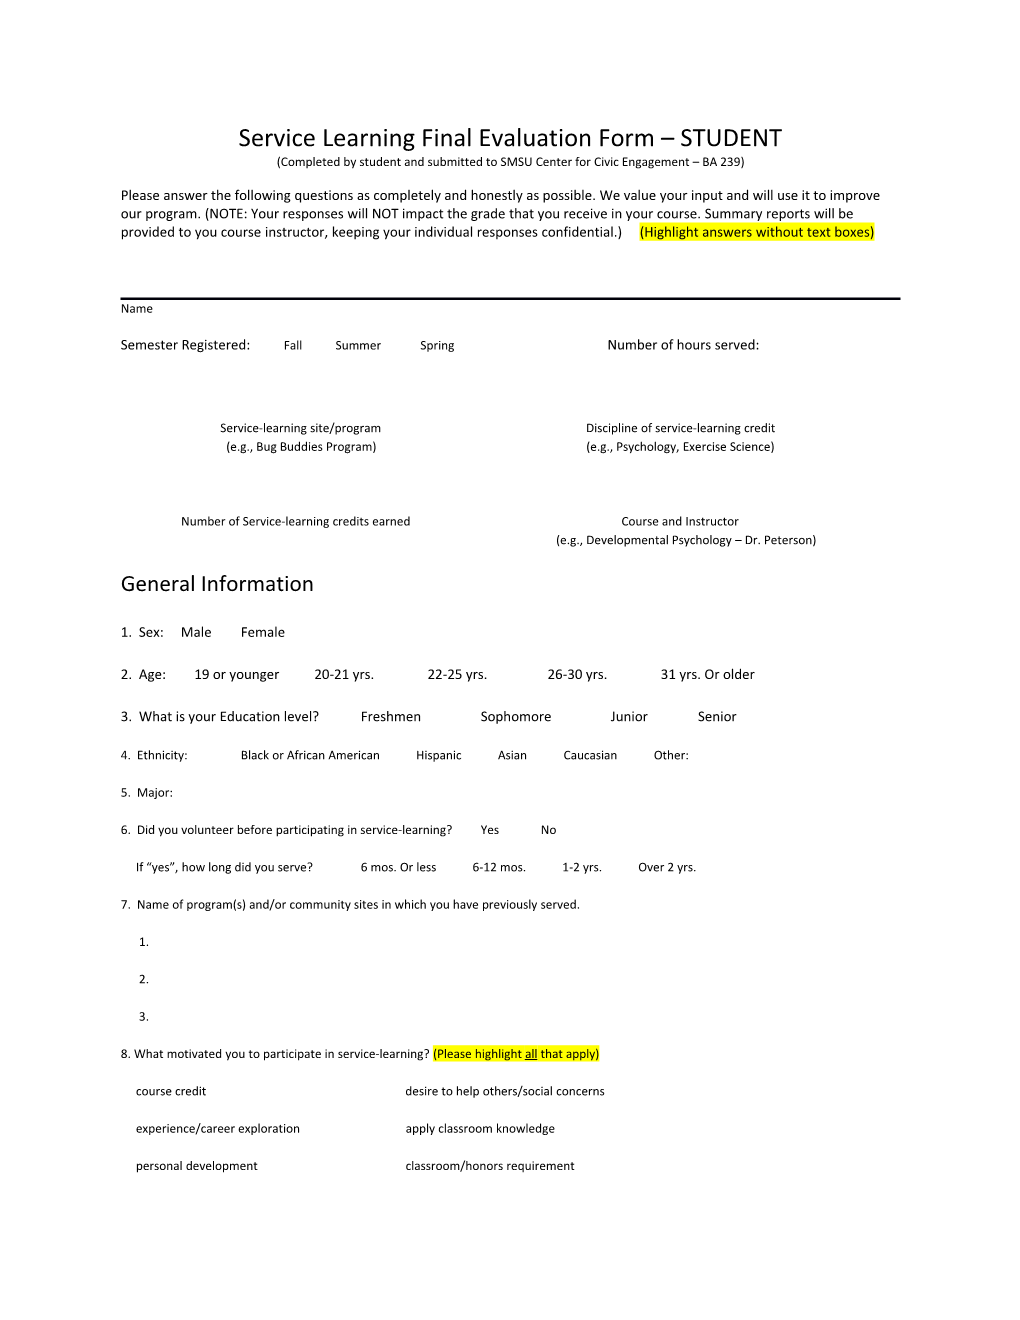 Service Learning Final Evaluation Form STUDENT